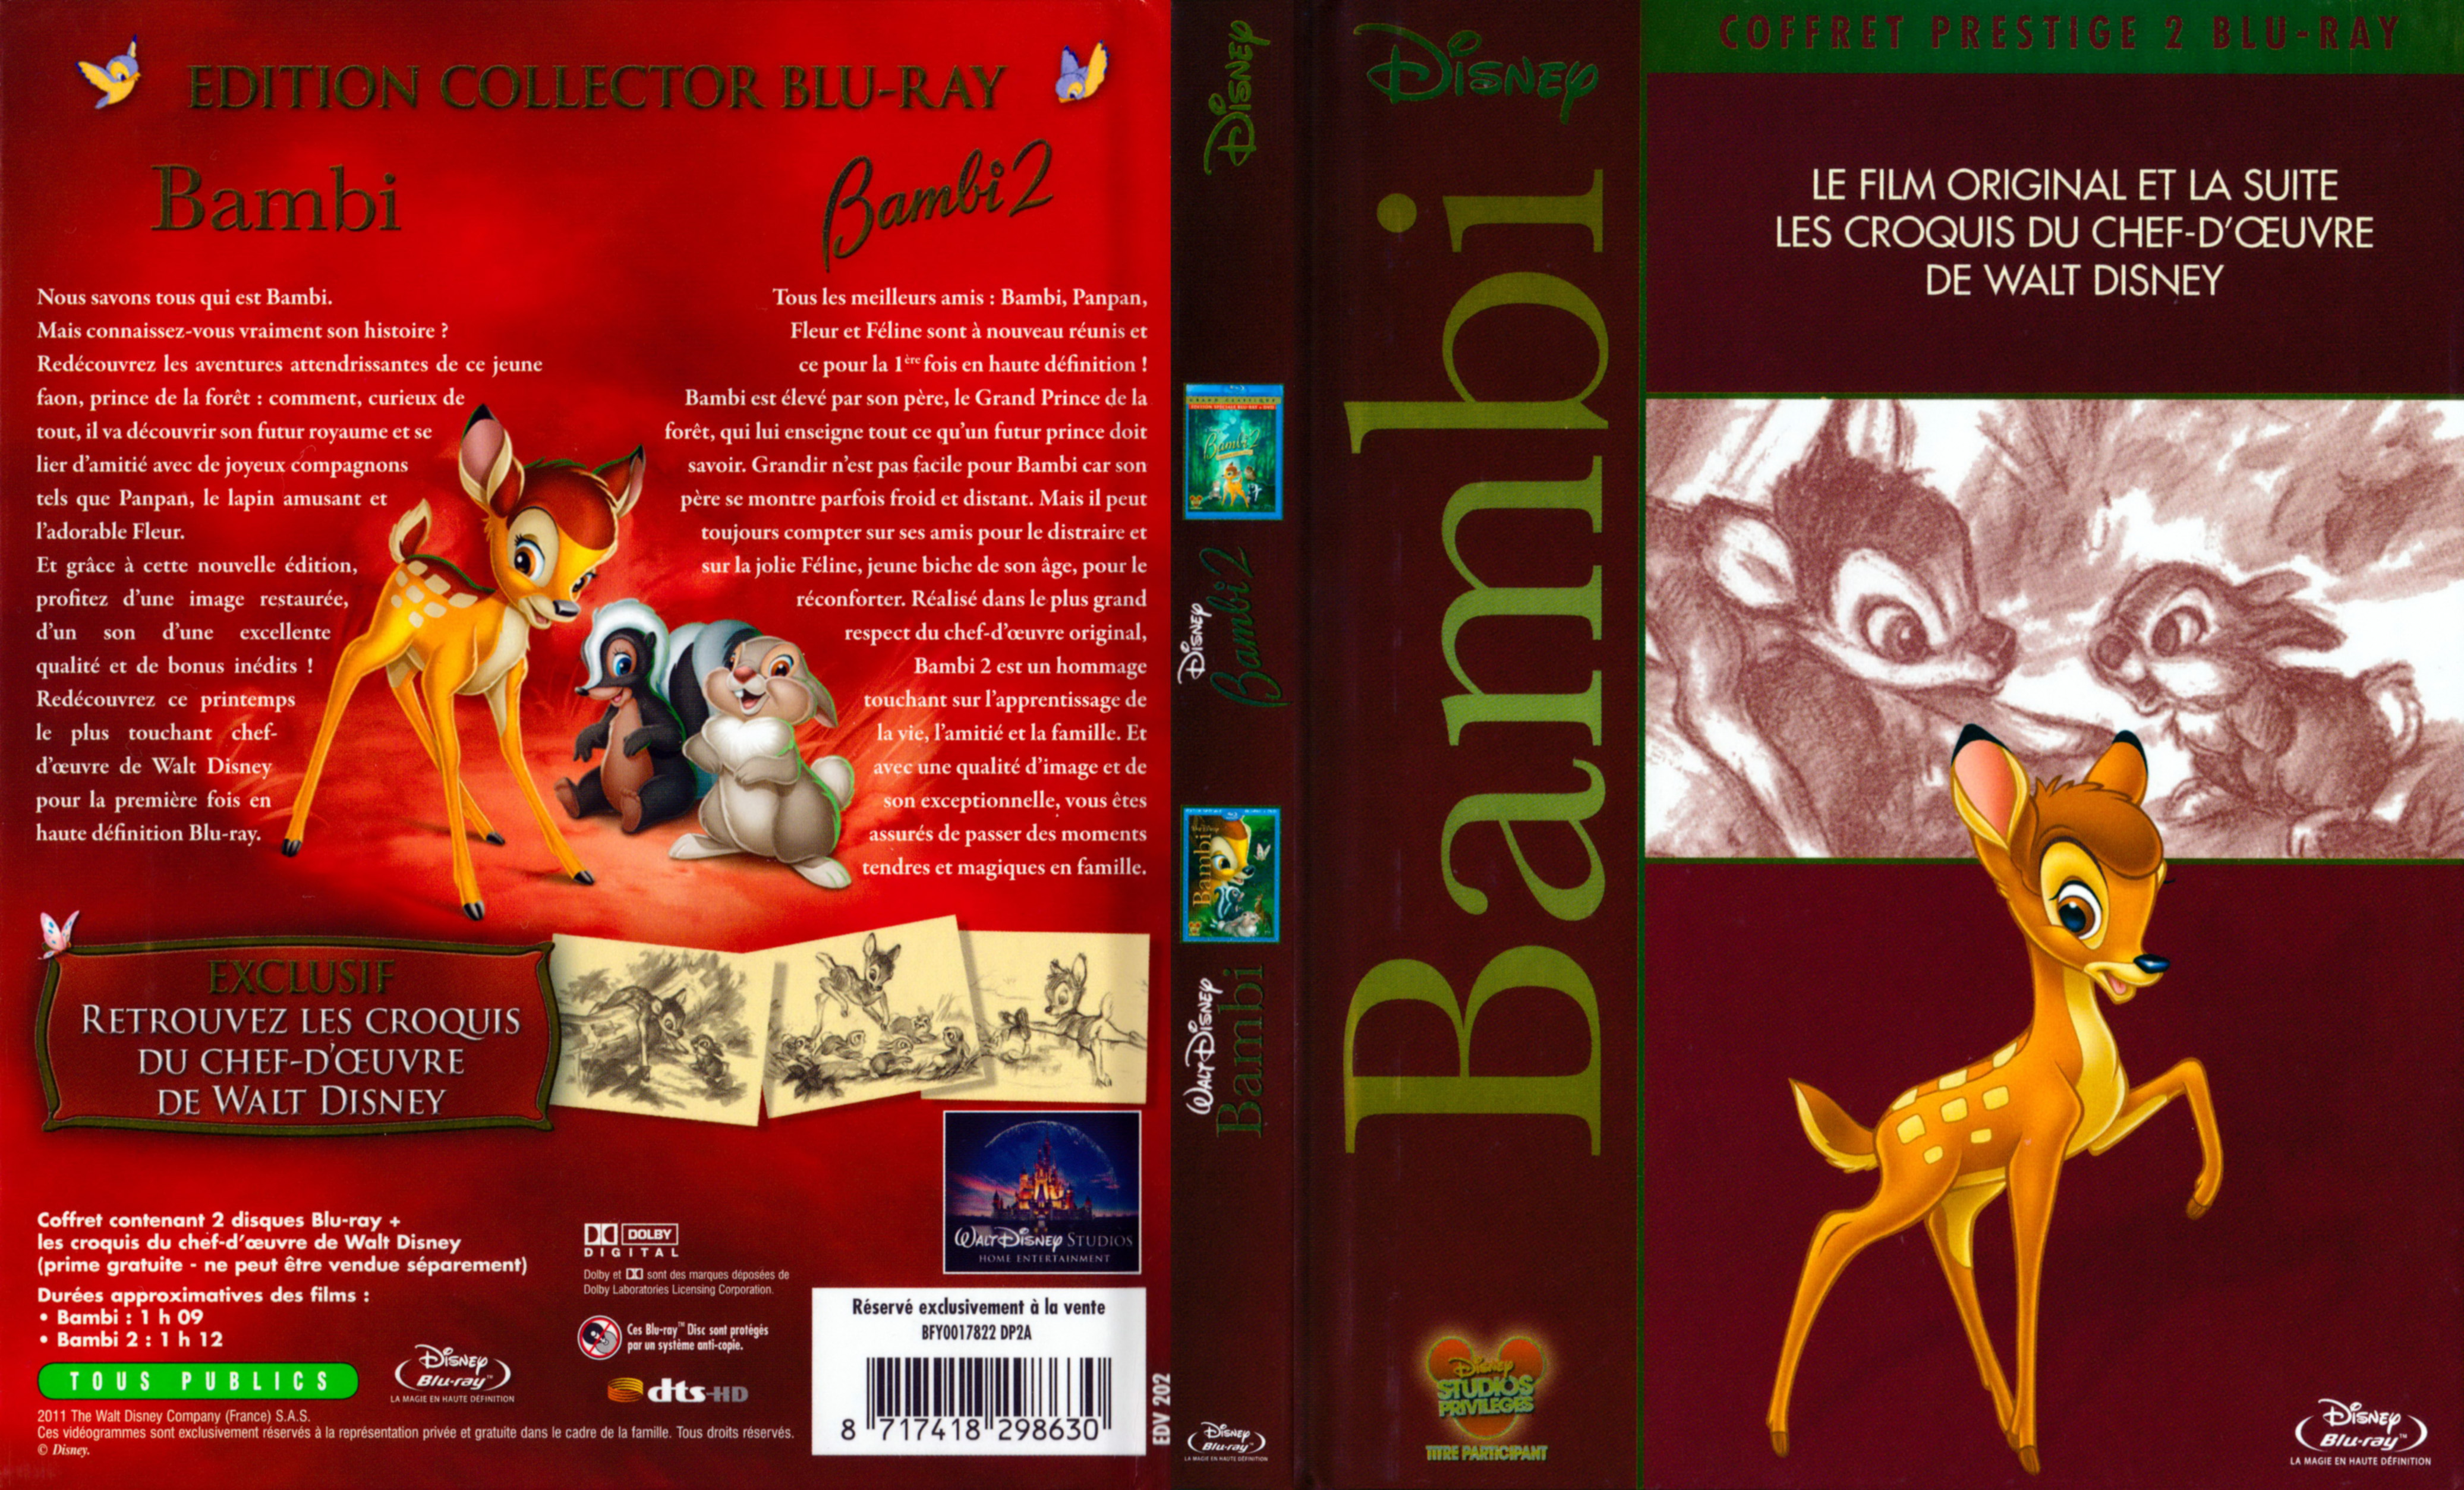 Jaquette DVD Bambi 1 et 2 (BLU-RAY)